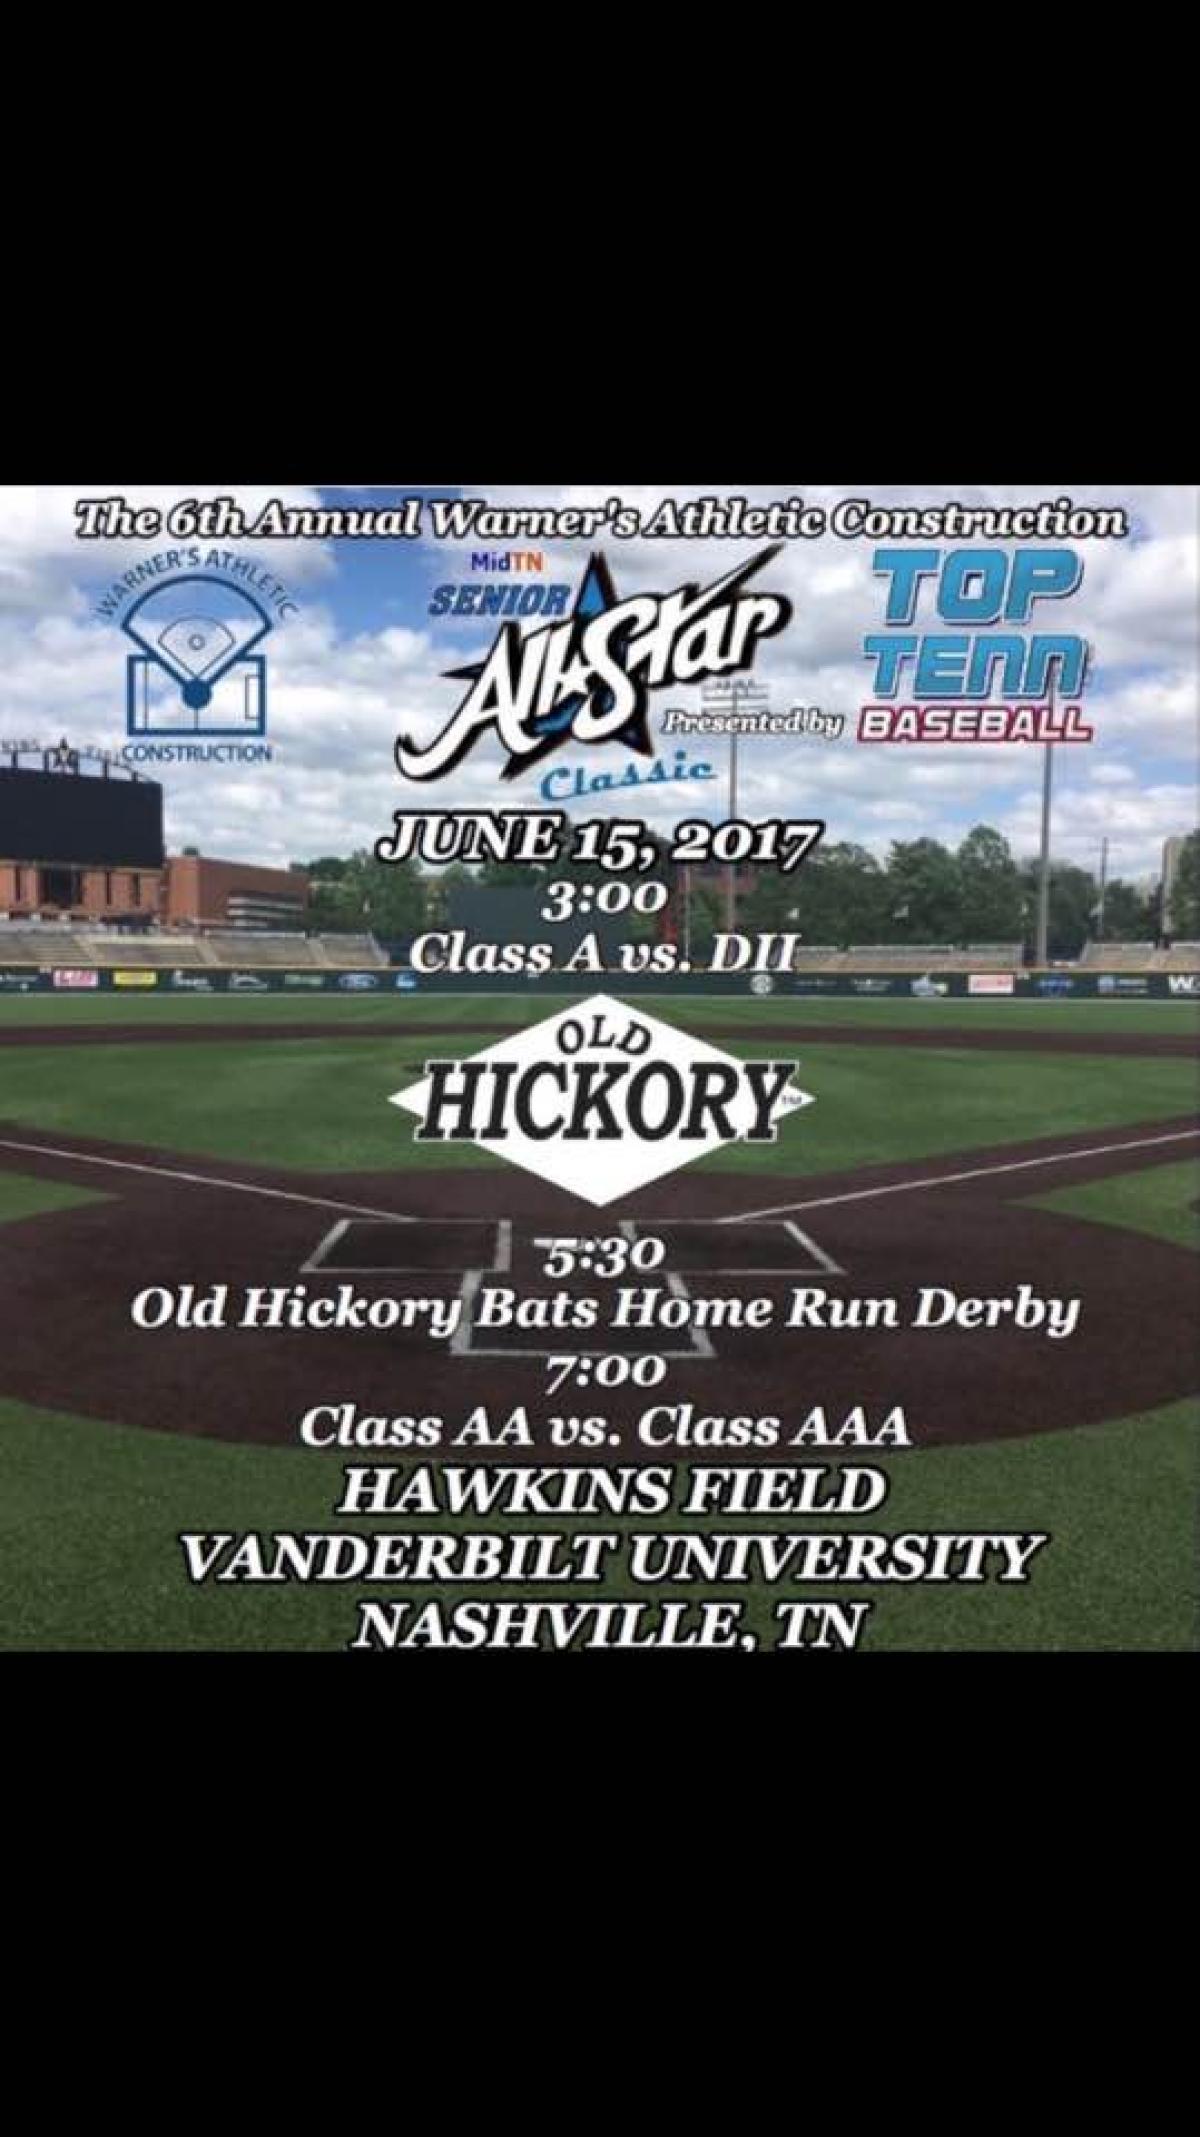 Two Tigers to Play in Mid-TN Senior All-Star Classic